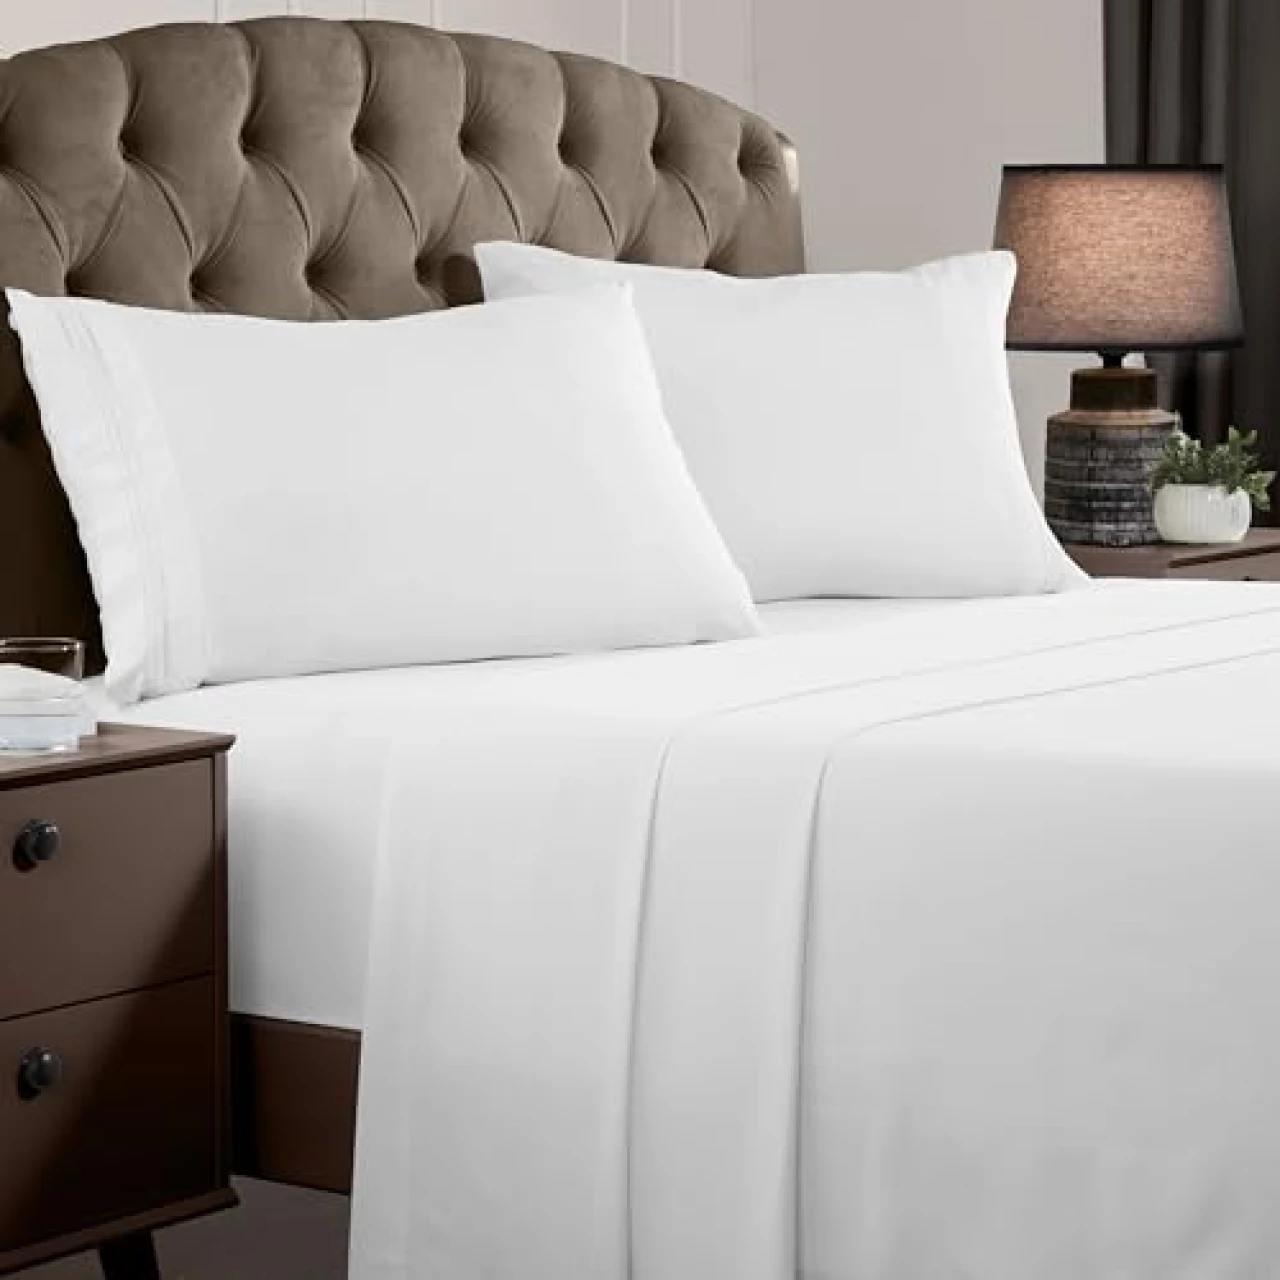 Mellanni Queen Sheet Set - 4 PC Iconic Collection